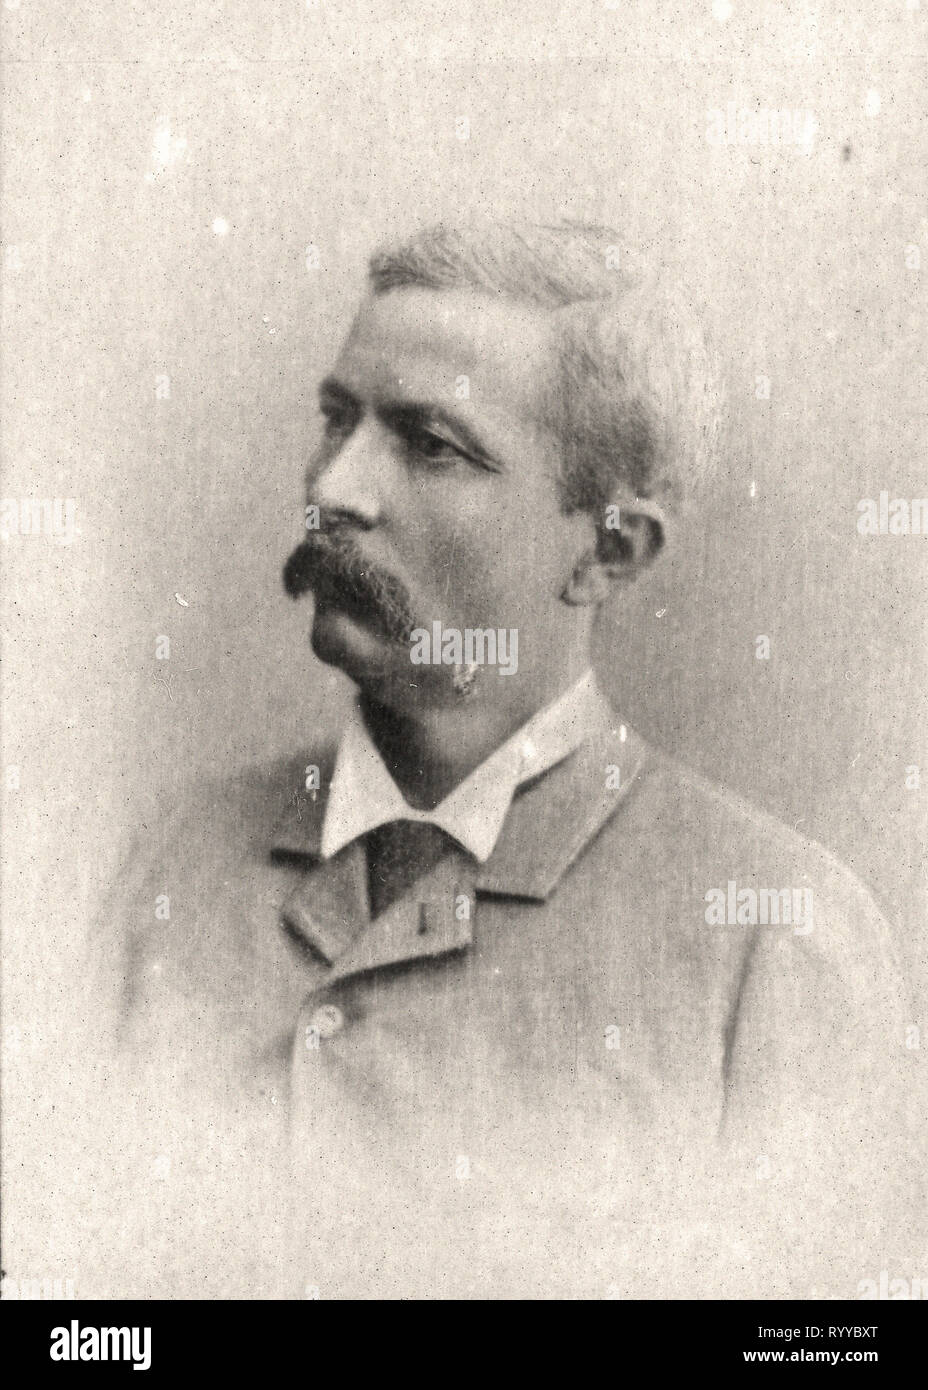 Photographic Portrait Of Stanley   From Collection Félix Potin, Early 20th Century Stock Photo